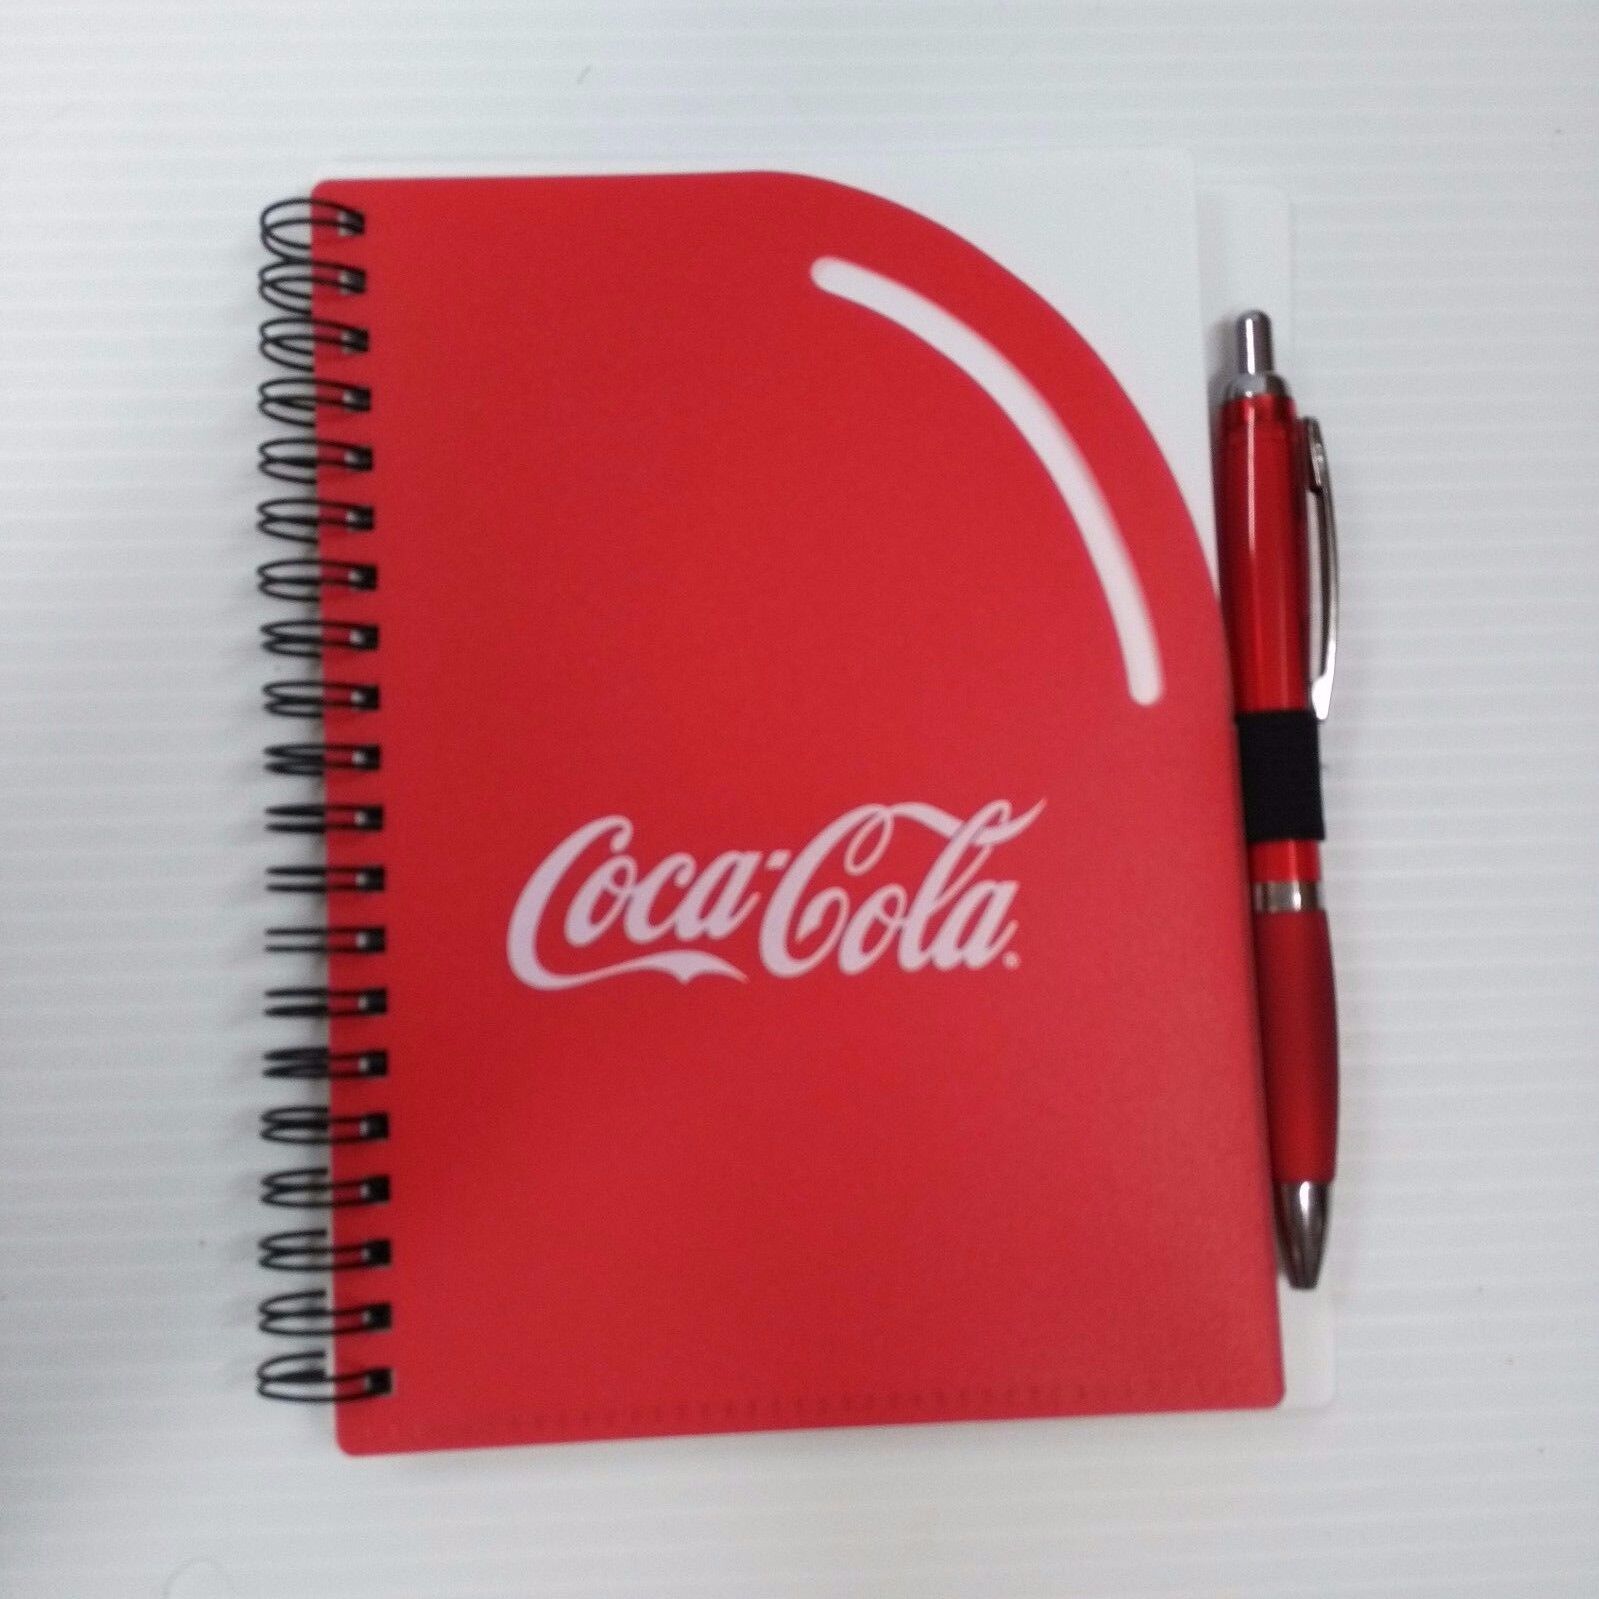 Coca-Cola Spiral Notebook with Pen - 